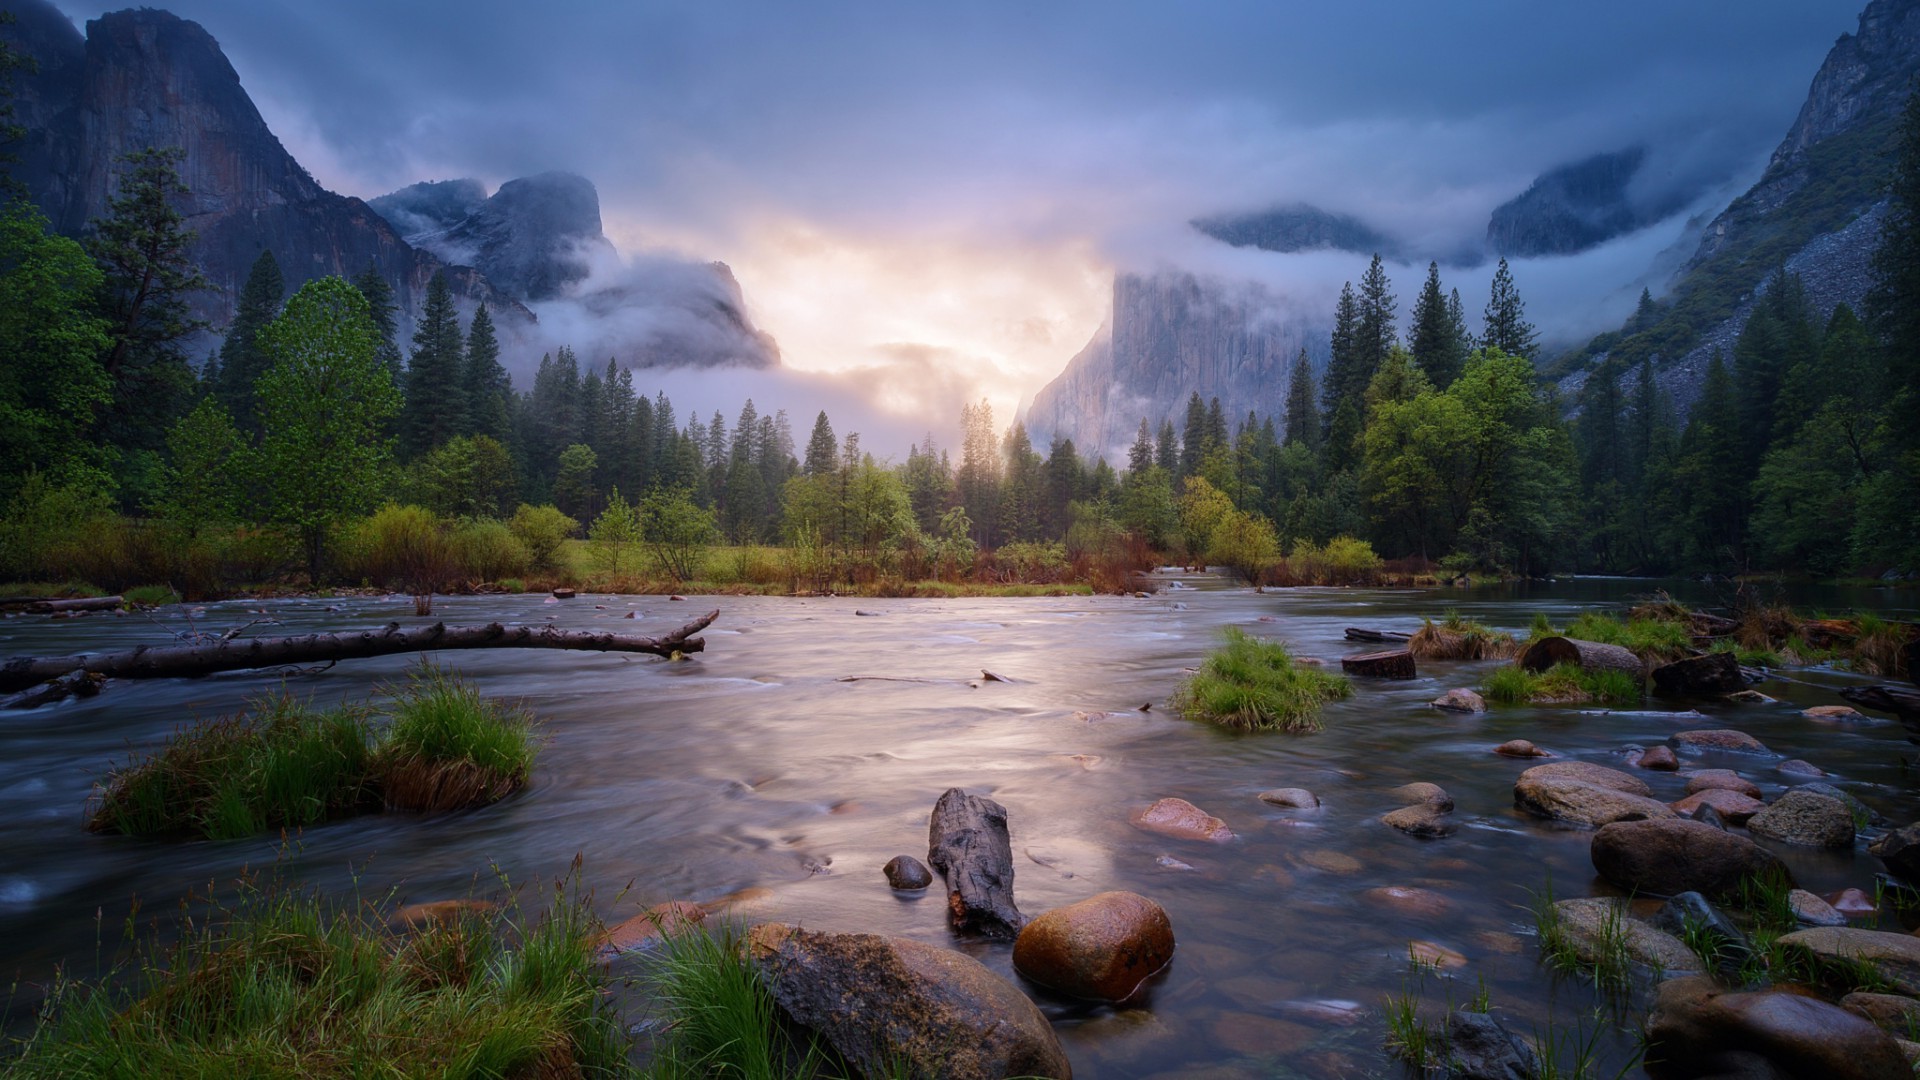 nature, Landscape, Mountain, Trees, Forest, Water, Clouds, Reflection, California, USA, Yosemite National Park, Grass, Stones, Mist, Sunlight, Stream, Dead Trees, Rock Wallpaper